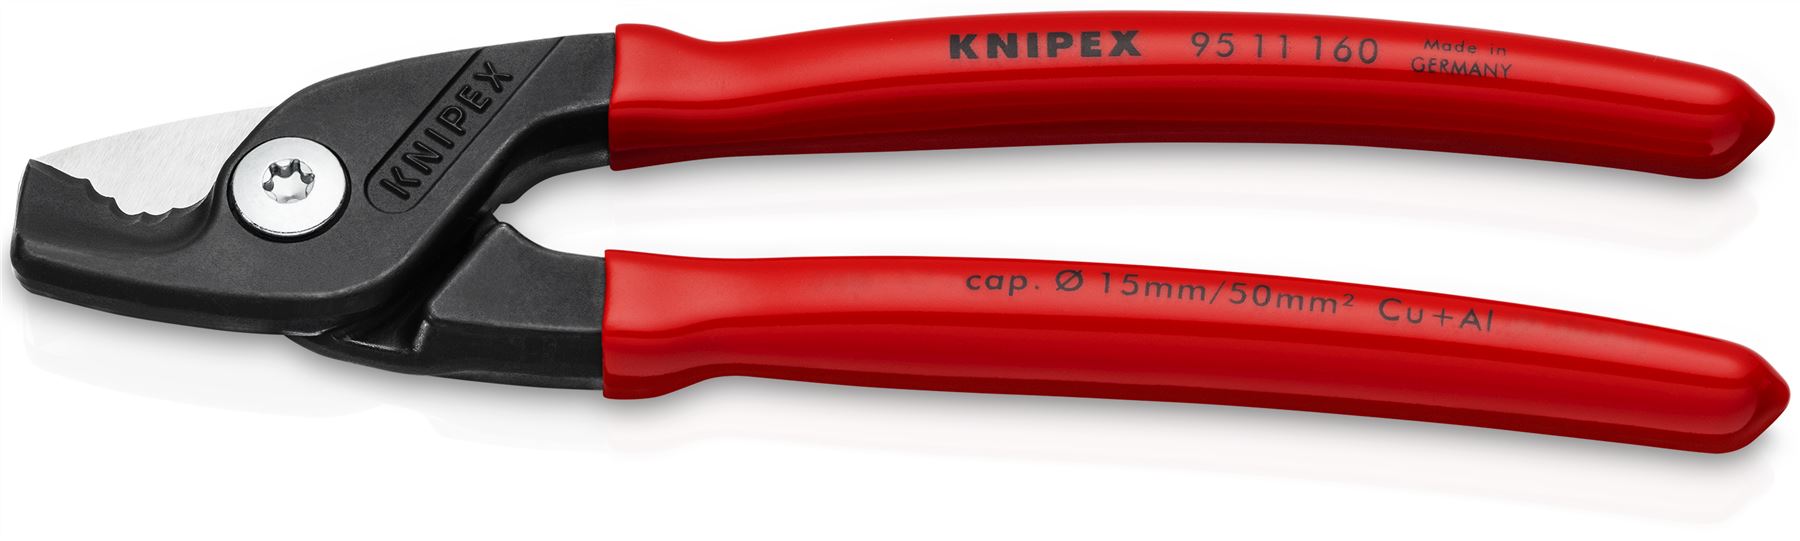 KNIPEX StepCut Cable Shears Cutting Pliers 15mm Capacity 160mm Plastic Coated Handles 95 11 160 SB